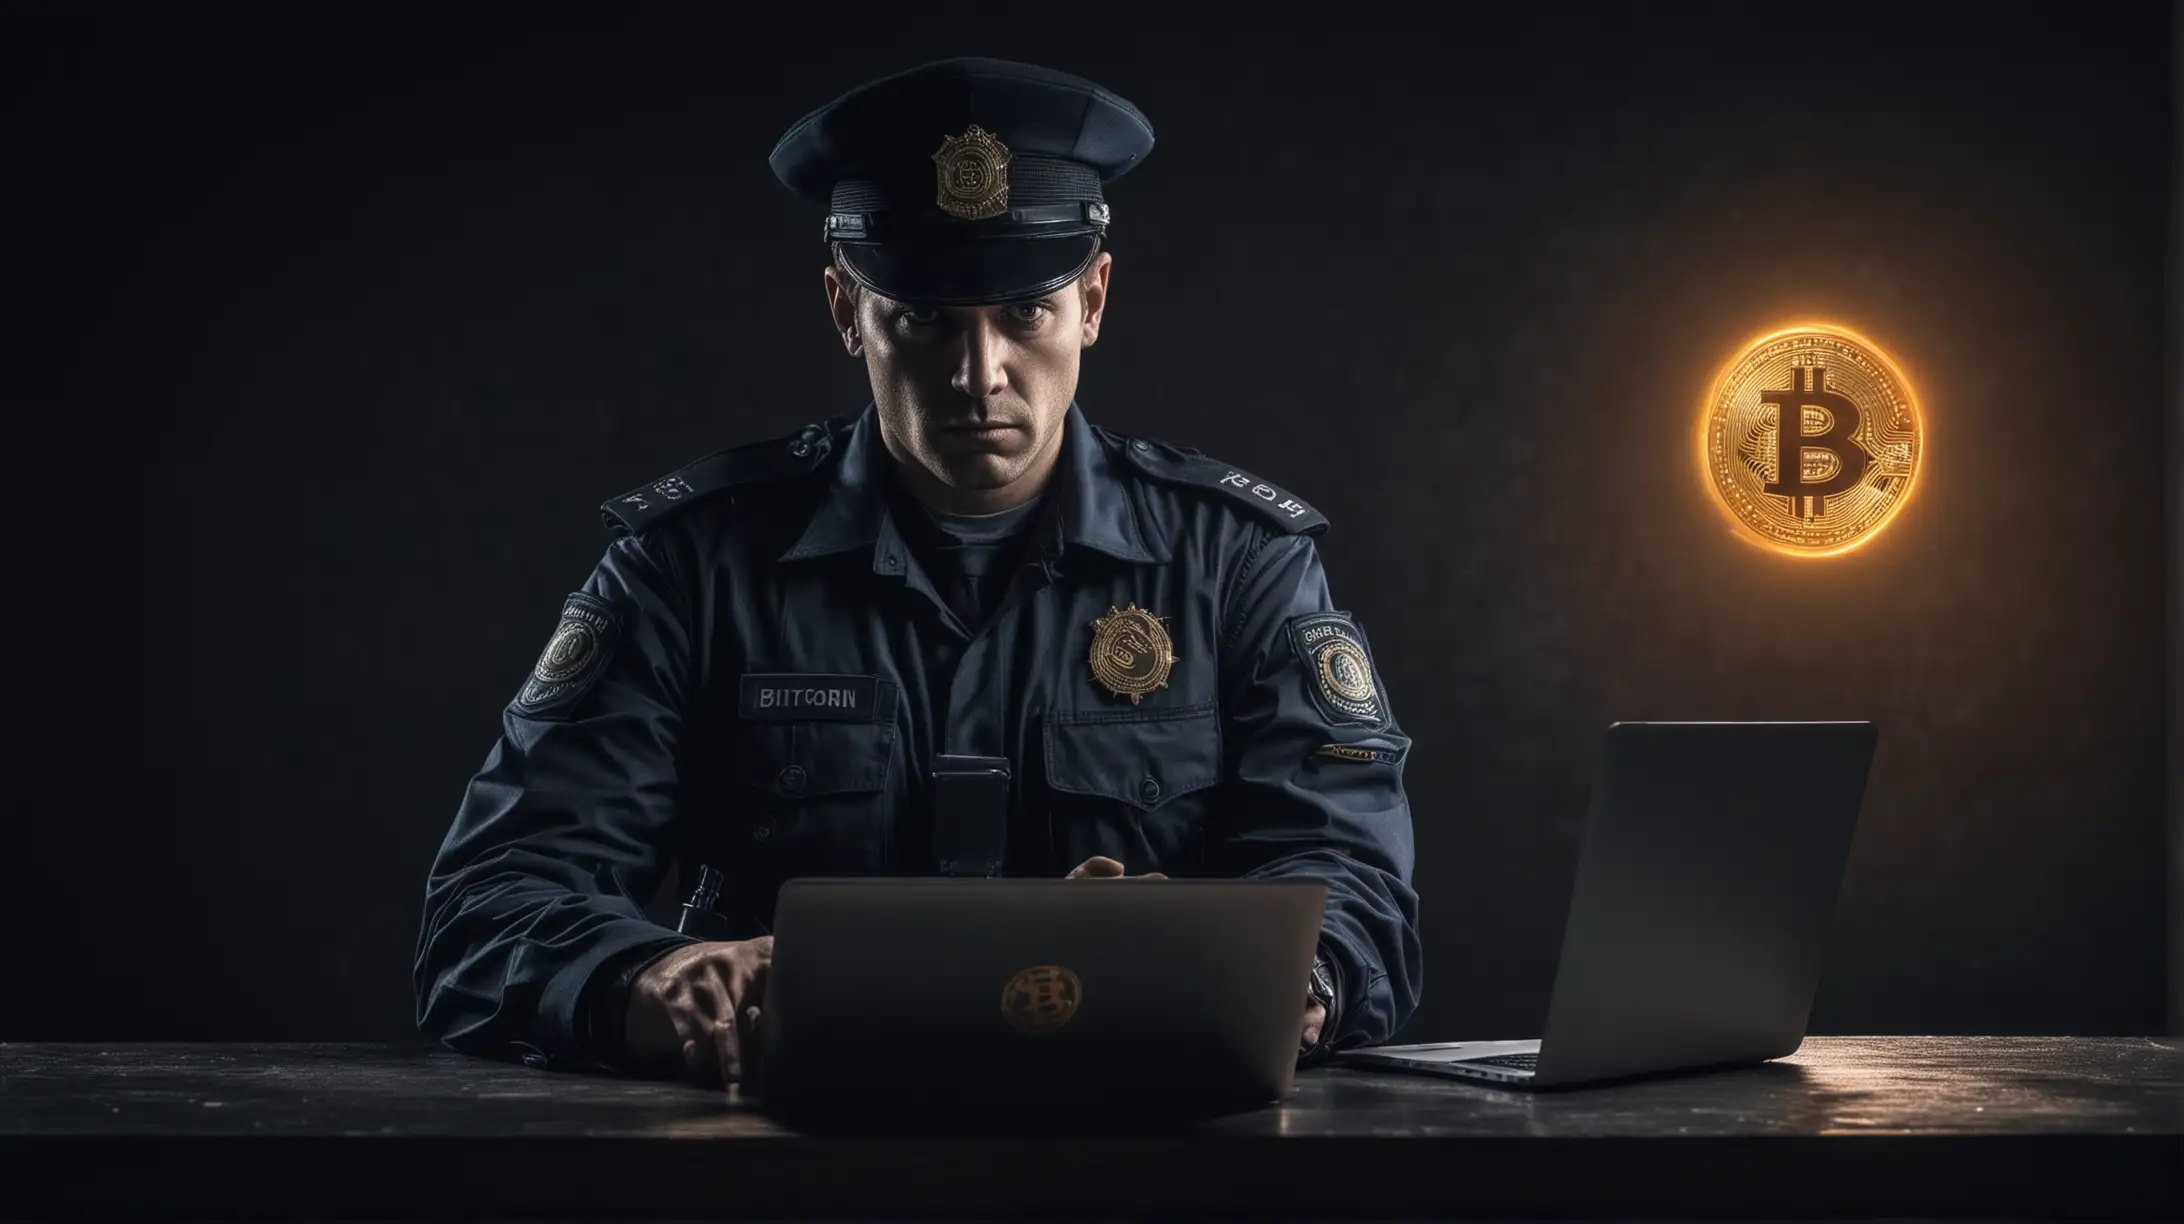 a policeman in a dark environment sitting in front of a laptop holding a bitcoin